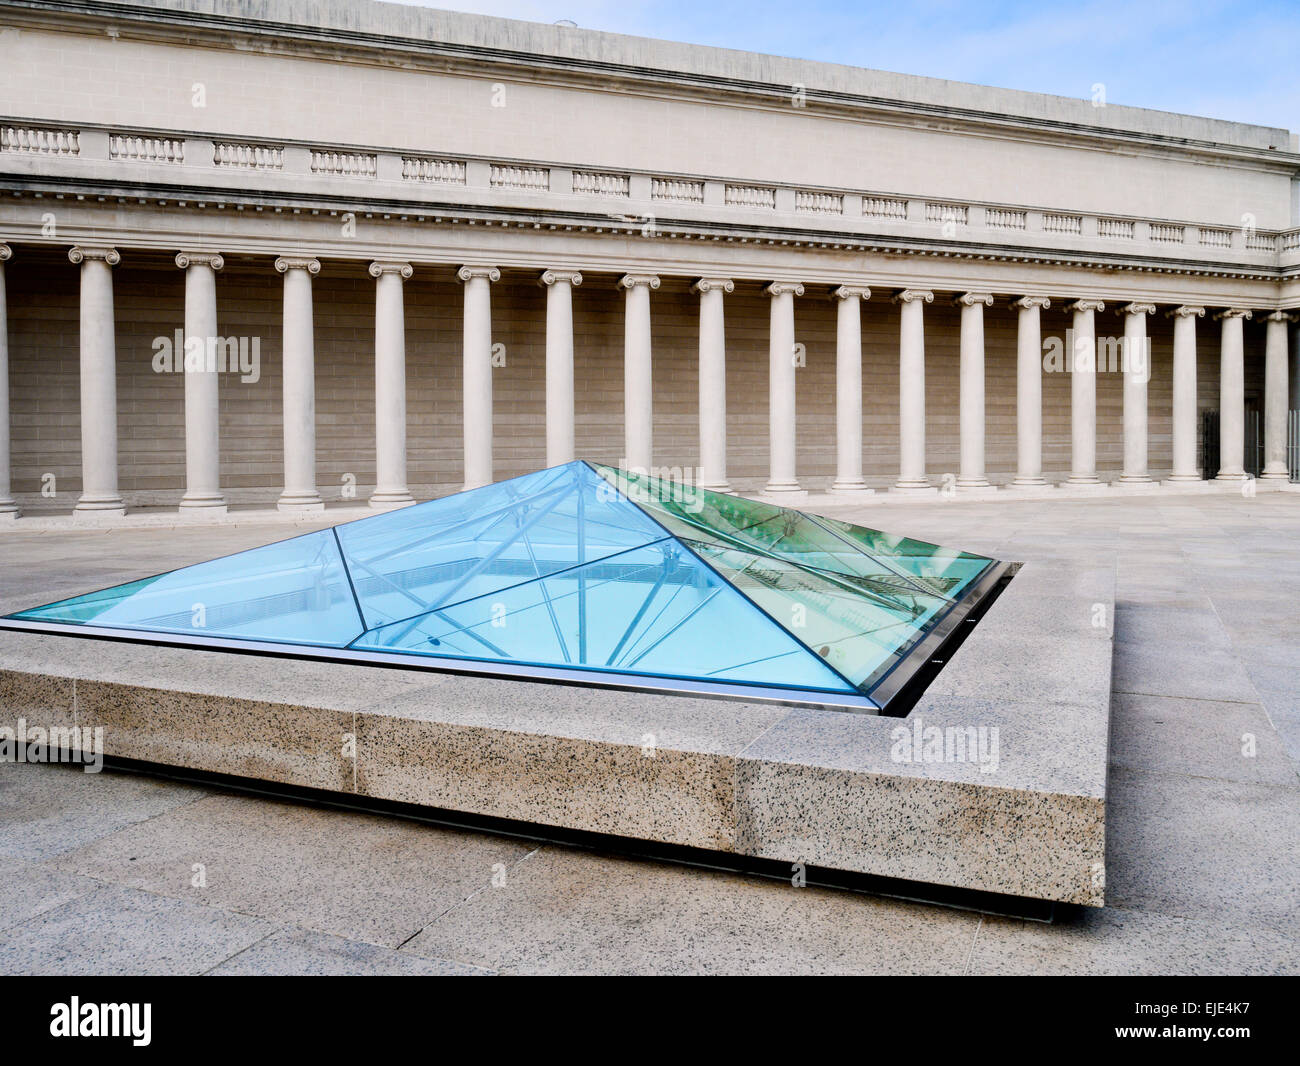 Courtyard of the Palace of the Legion of Honor, San Francisco, CA Stock Photo